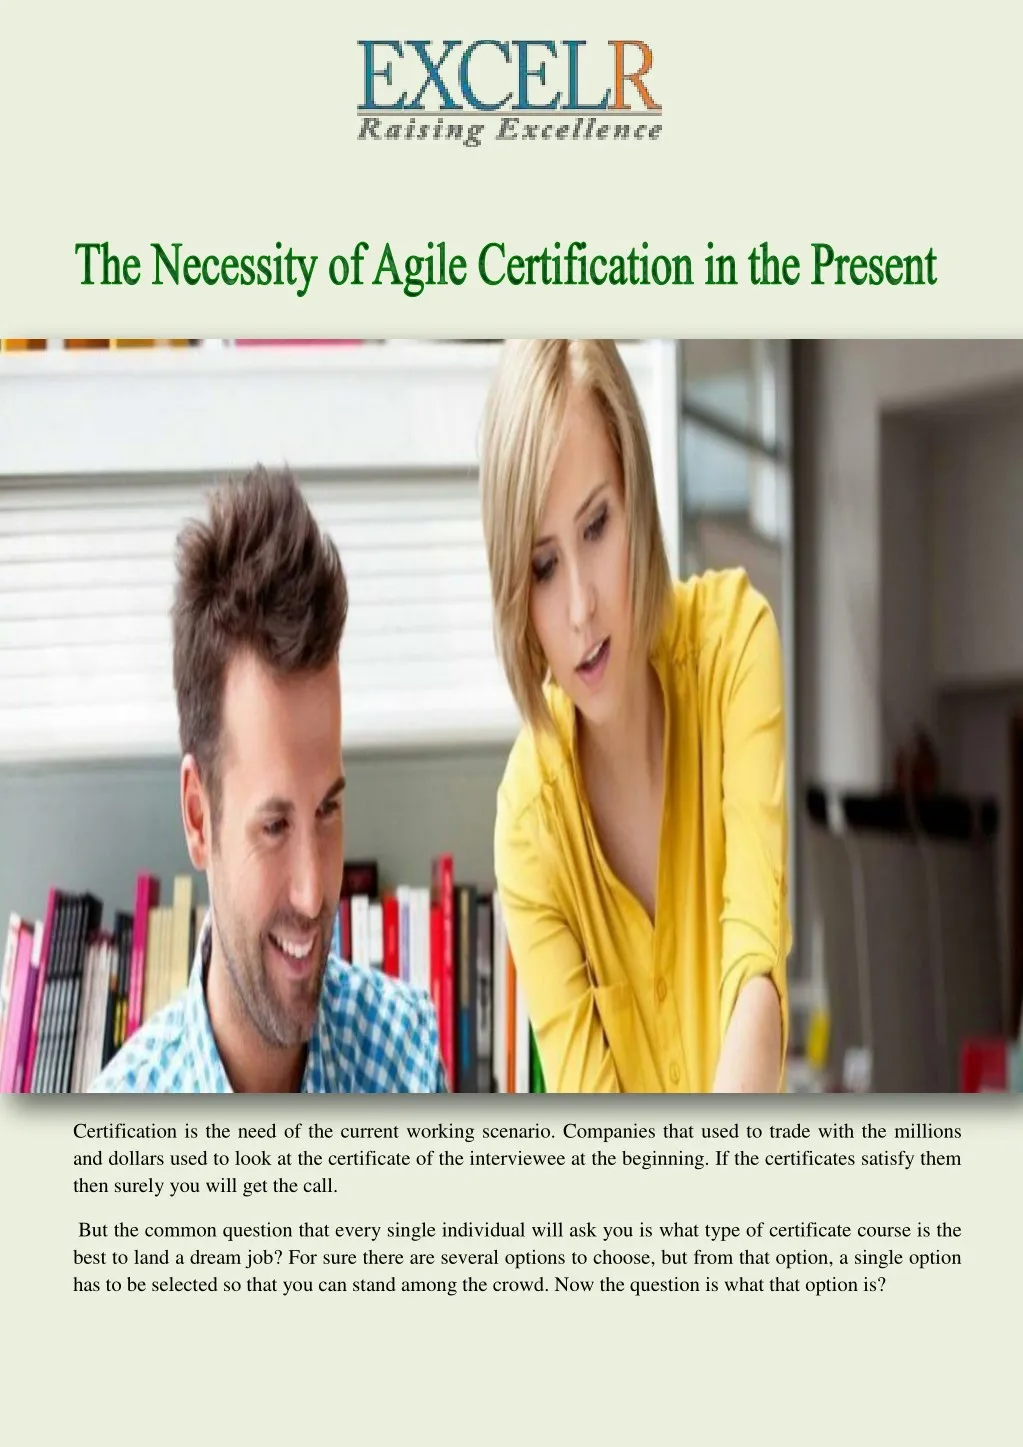 certification is the need of the current working